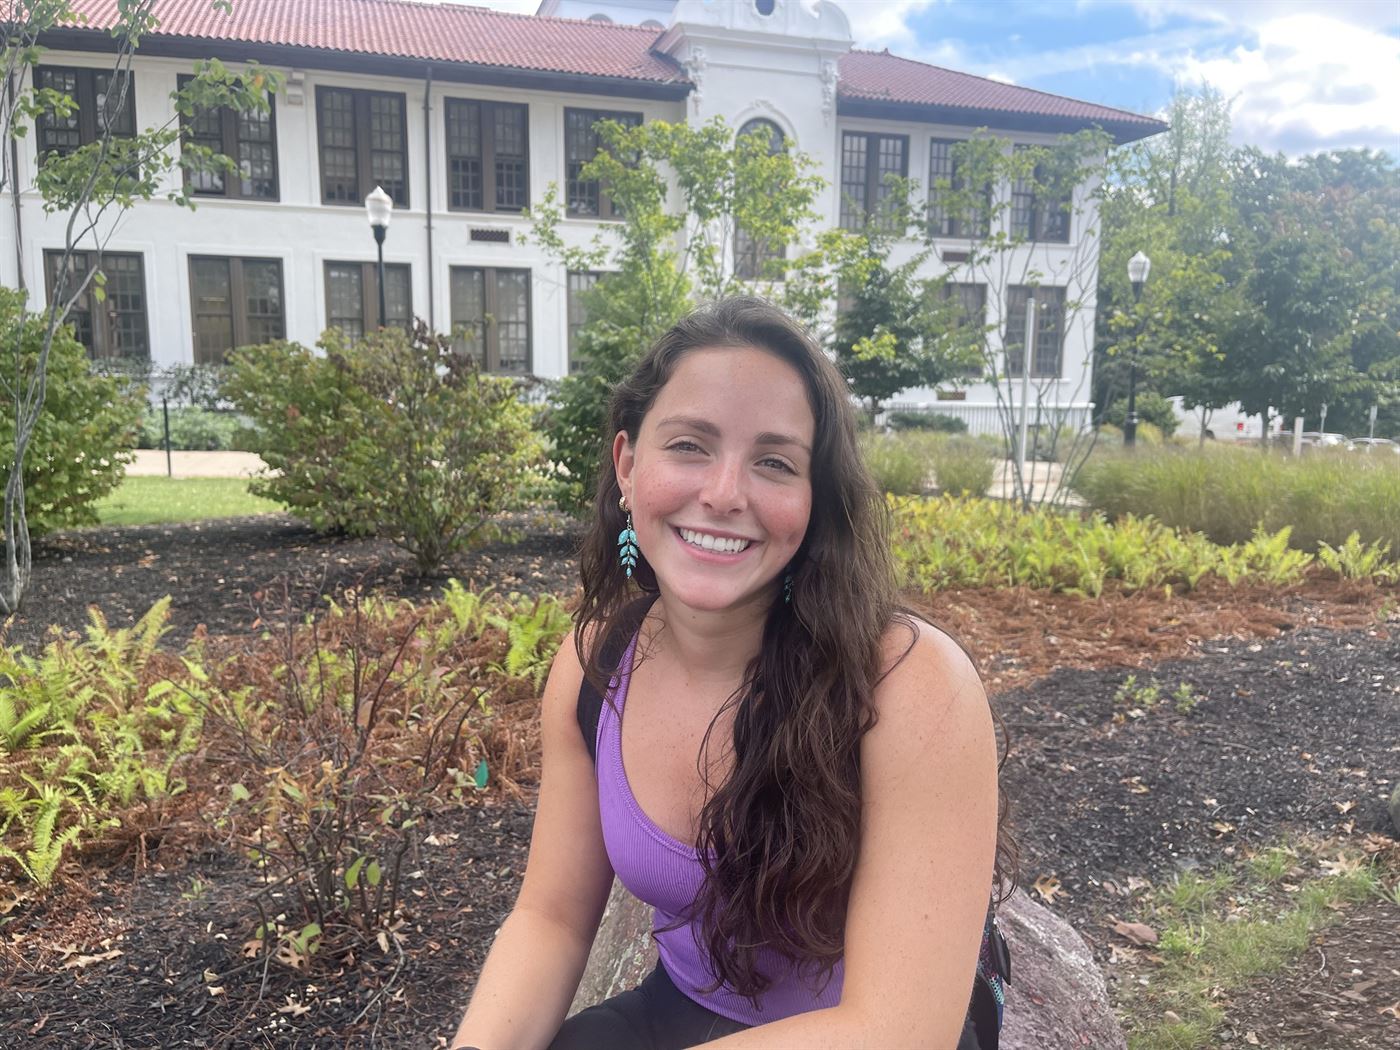 Cameron Marino, a senior visual arts major, says the parking prices are expensive. Jennifer Portorreal | The Montclarion